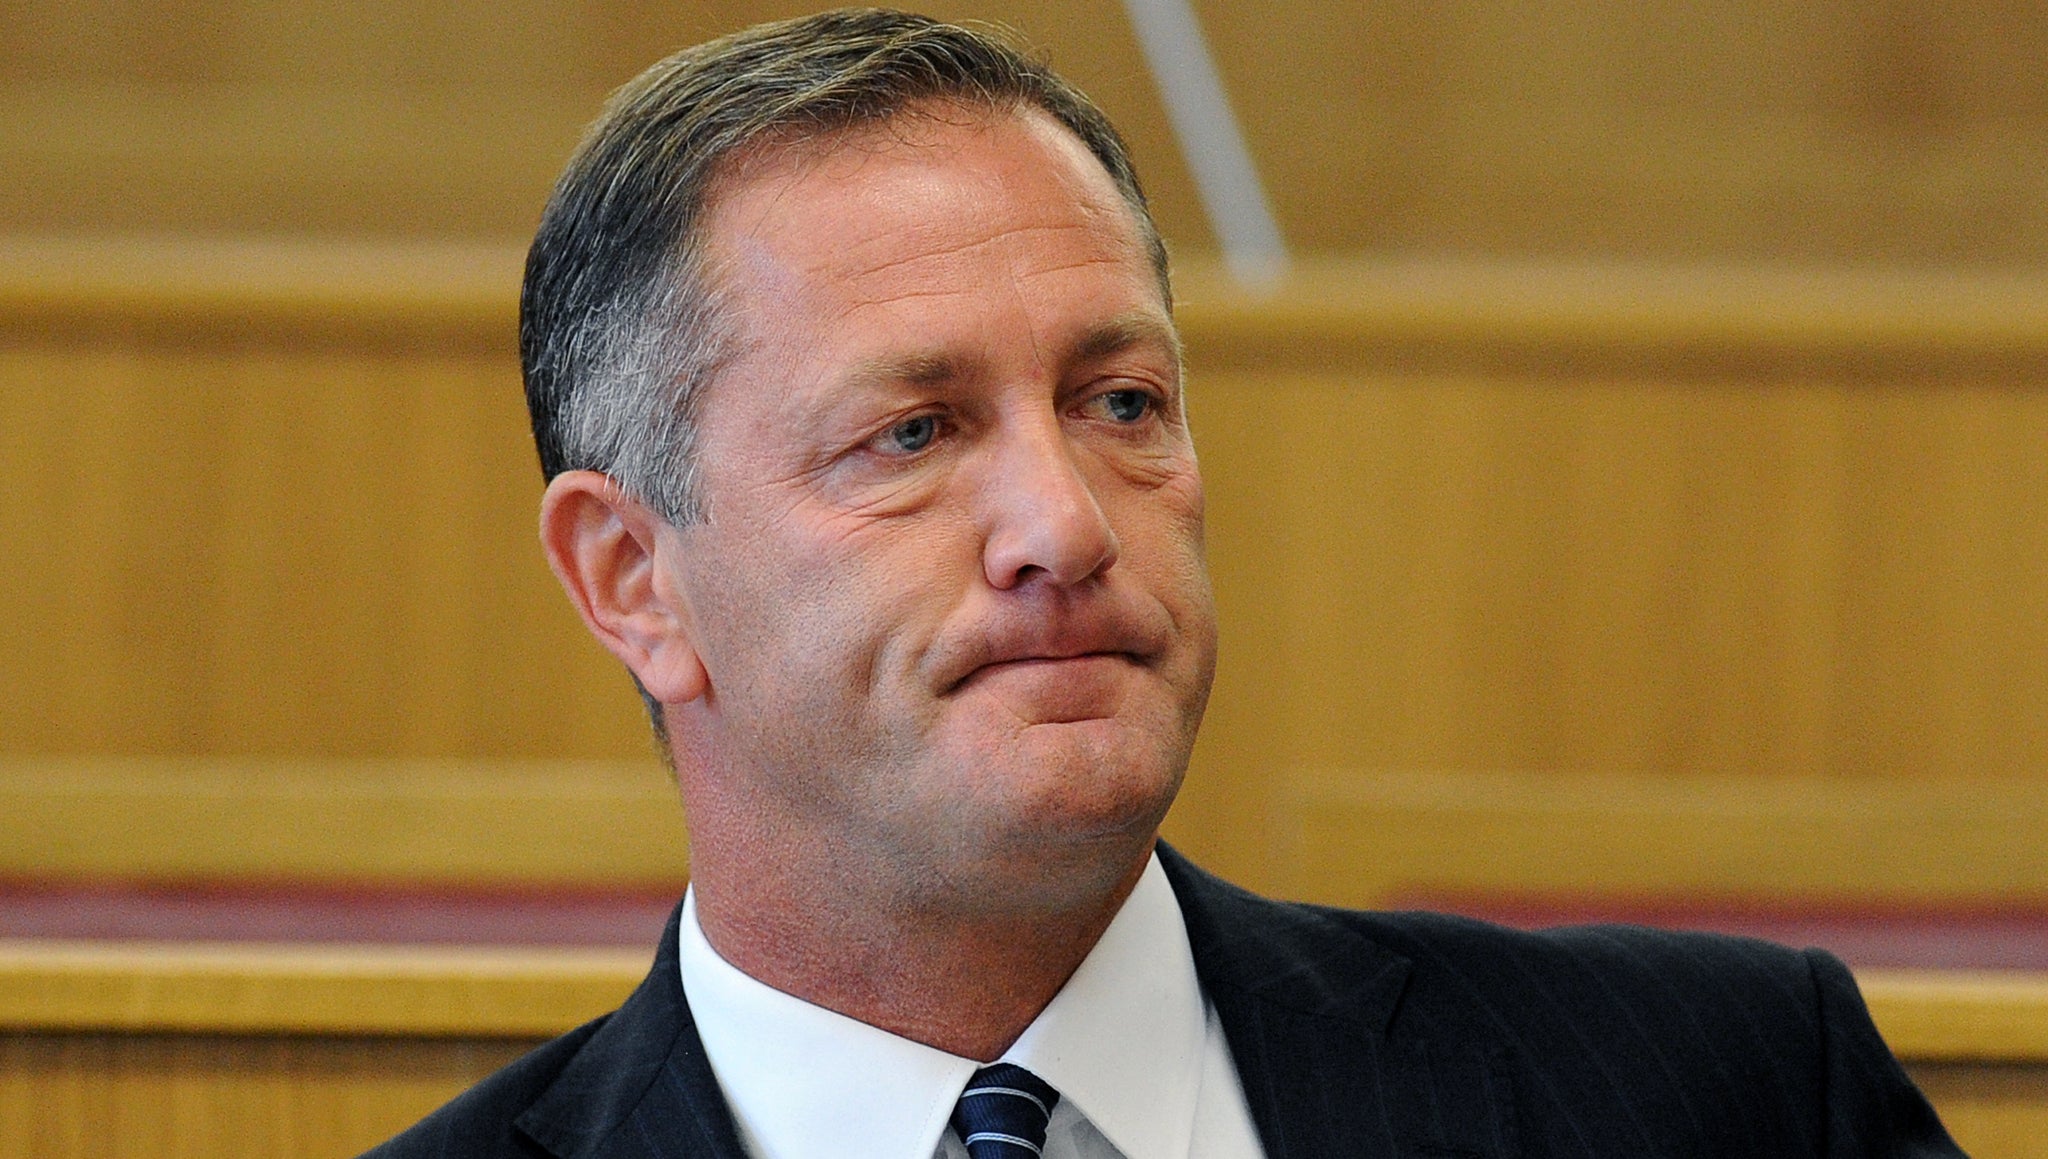 The former PCC of South Yorkshire's Police Shaun Wright, who resigned over the Rotherham child abuse scandal